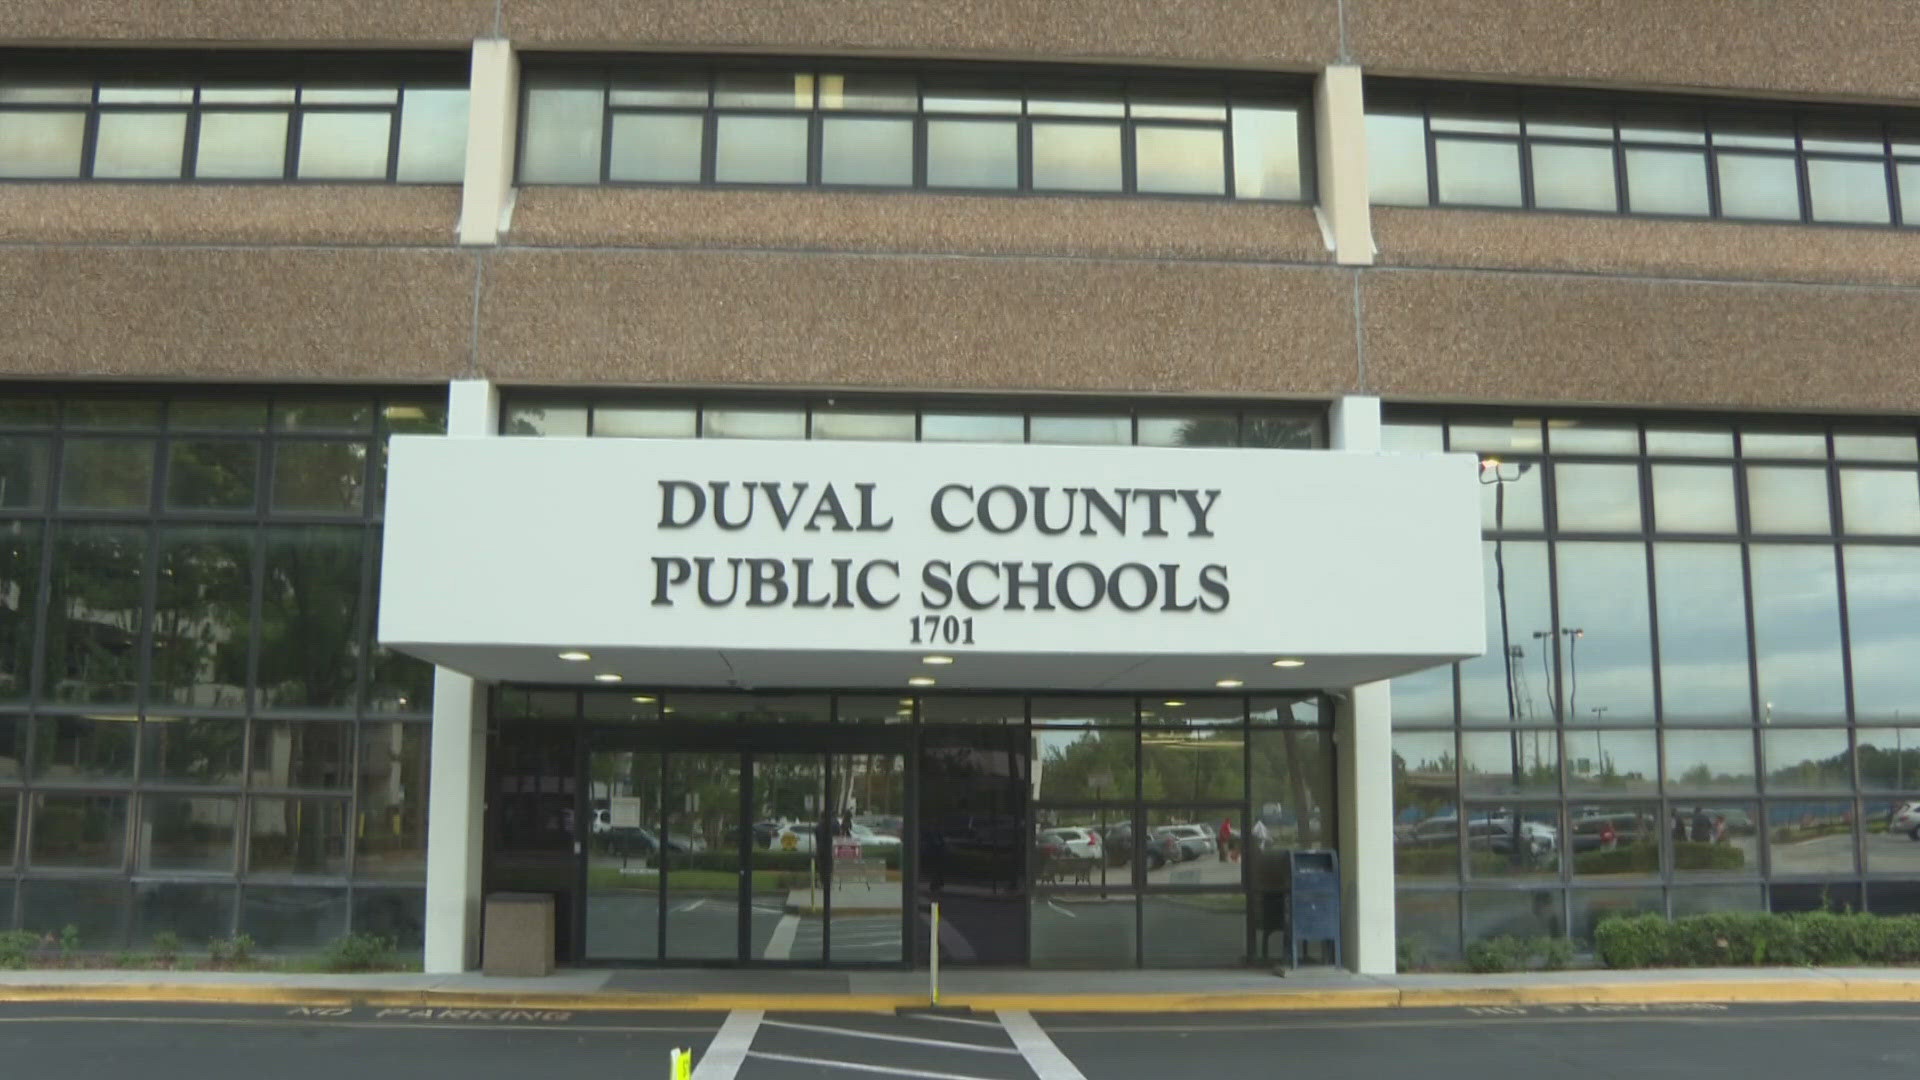 Kevin Bryan Pearce, 57, was hired by Duval County Public Schools in December 2017.